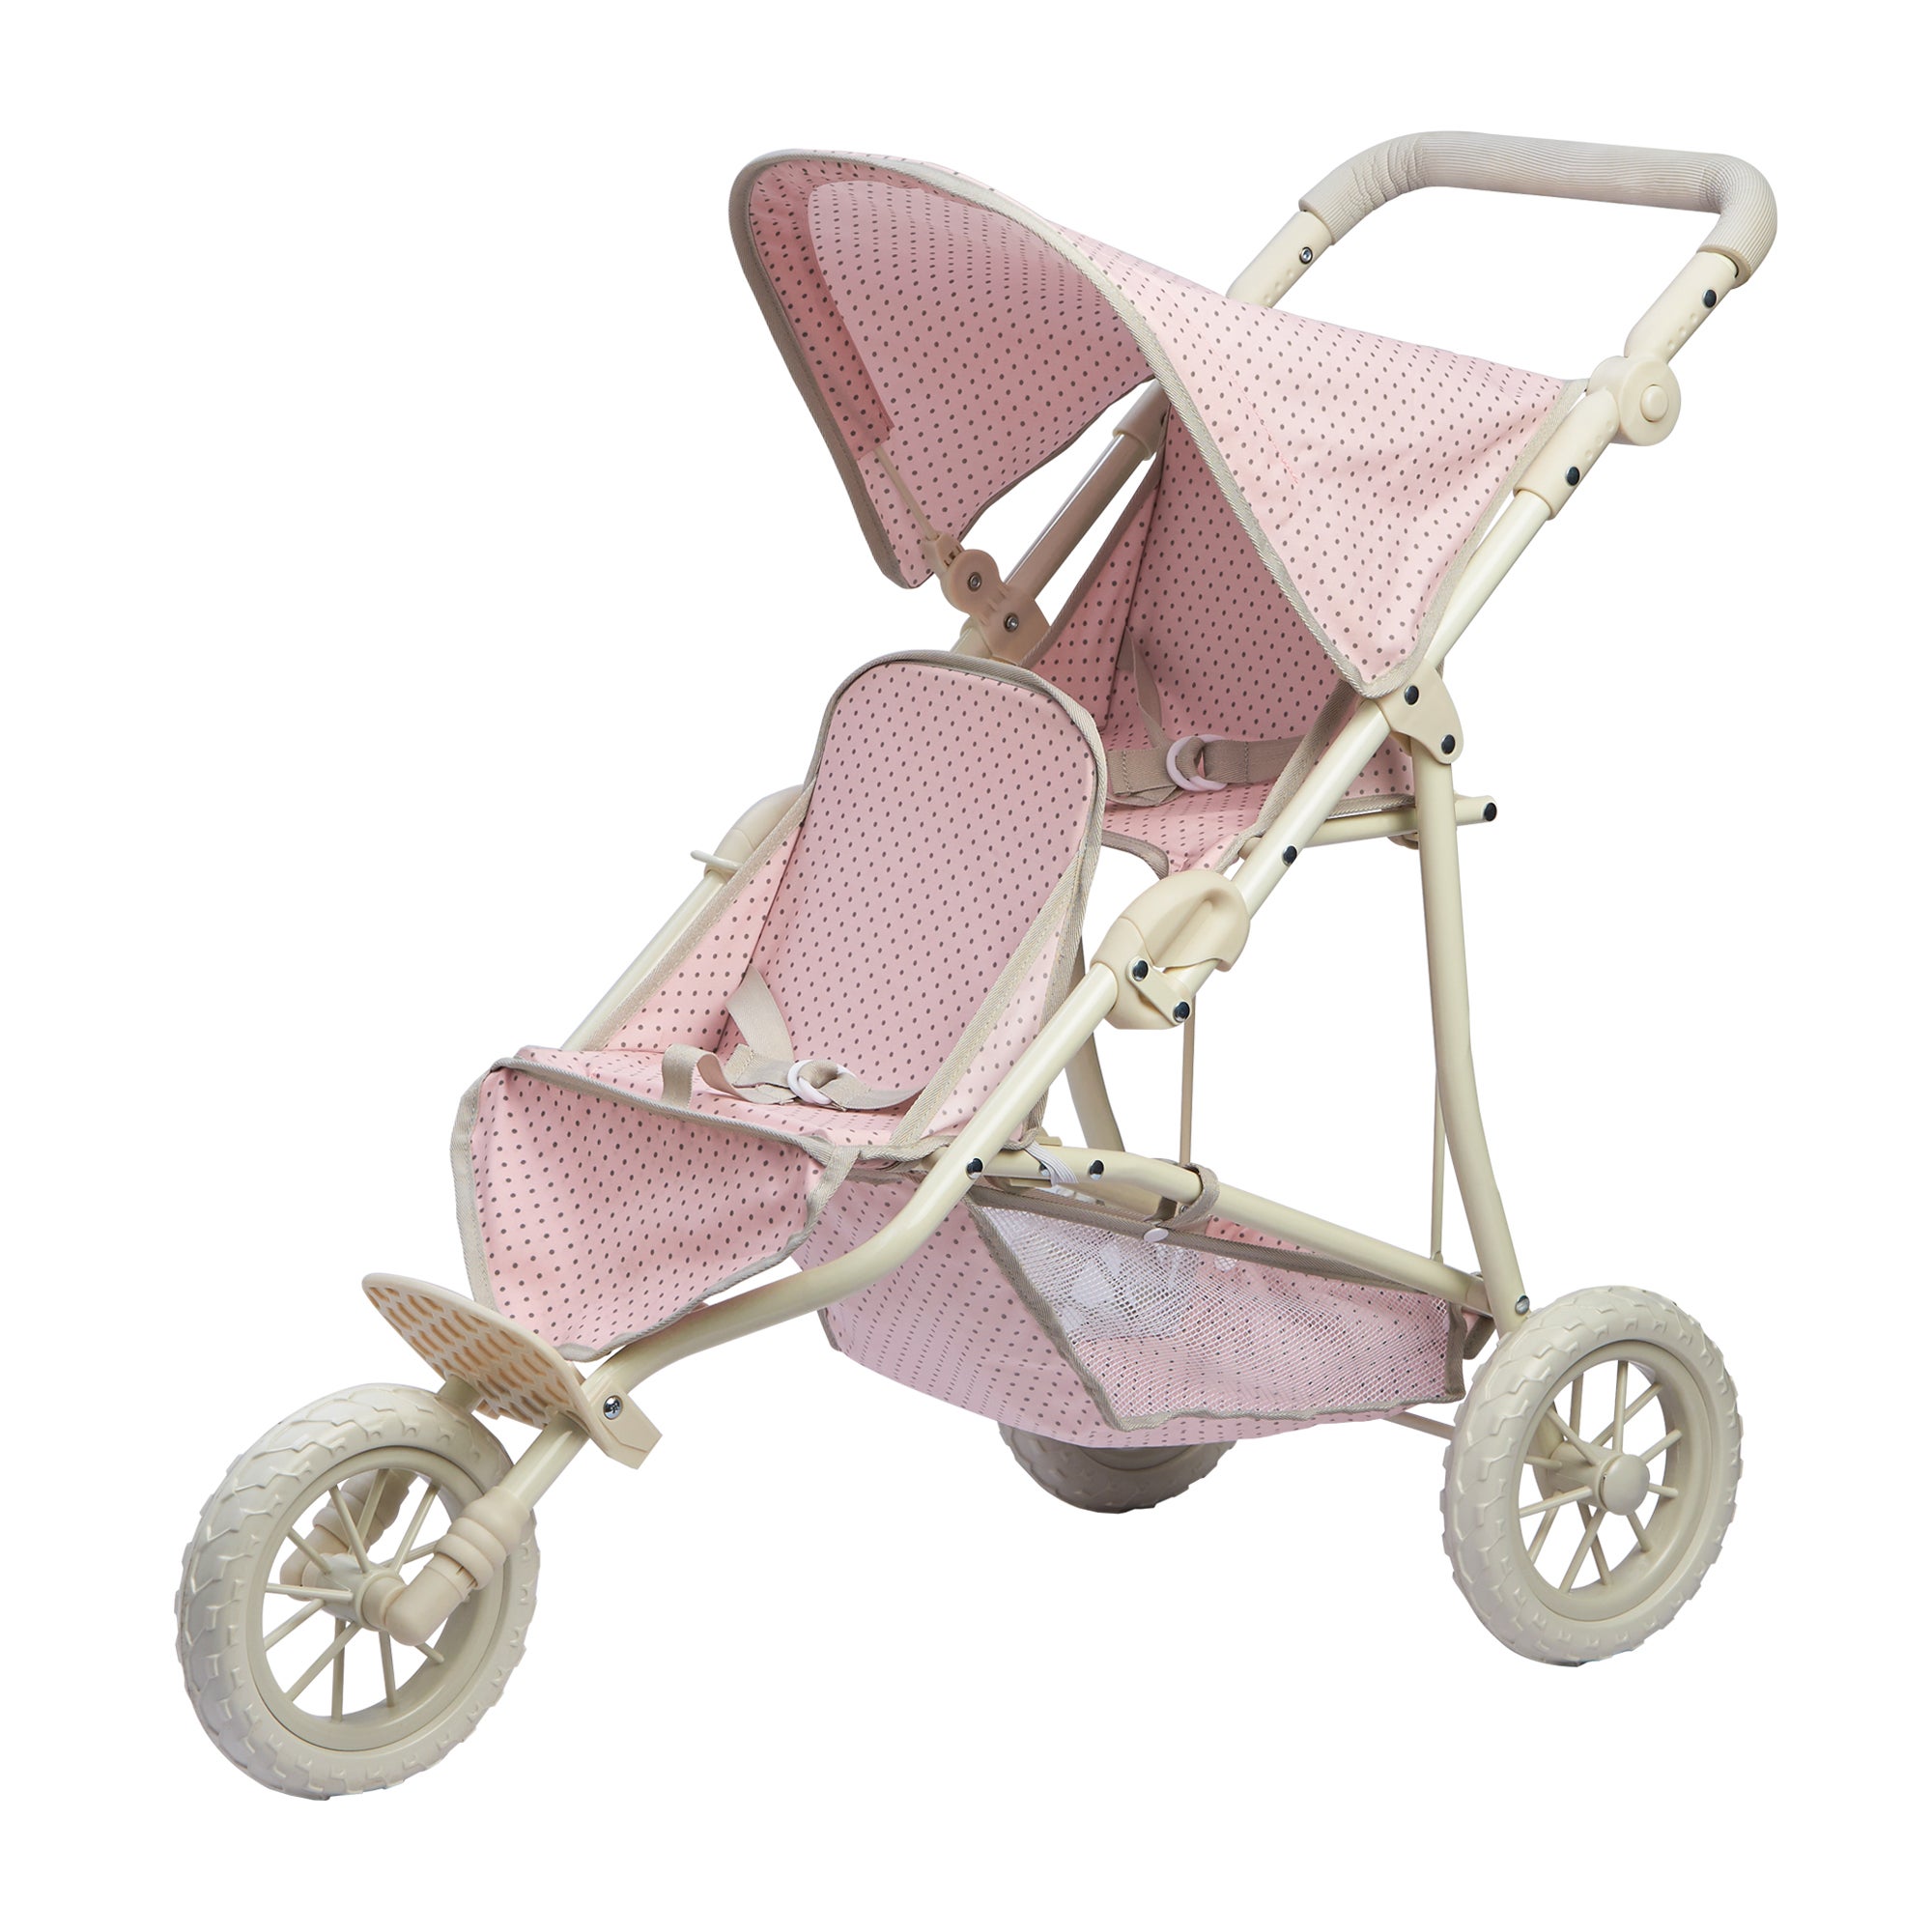 Teamson Kids Double Twin Baby Doll Stroller Pushchair Pink OL-00004